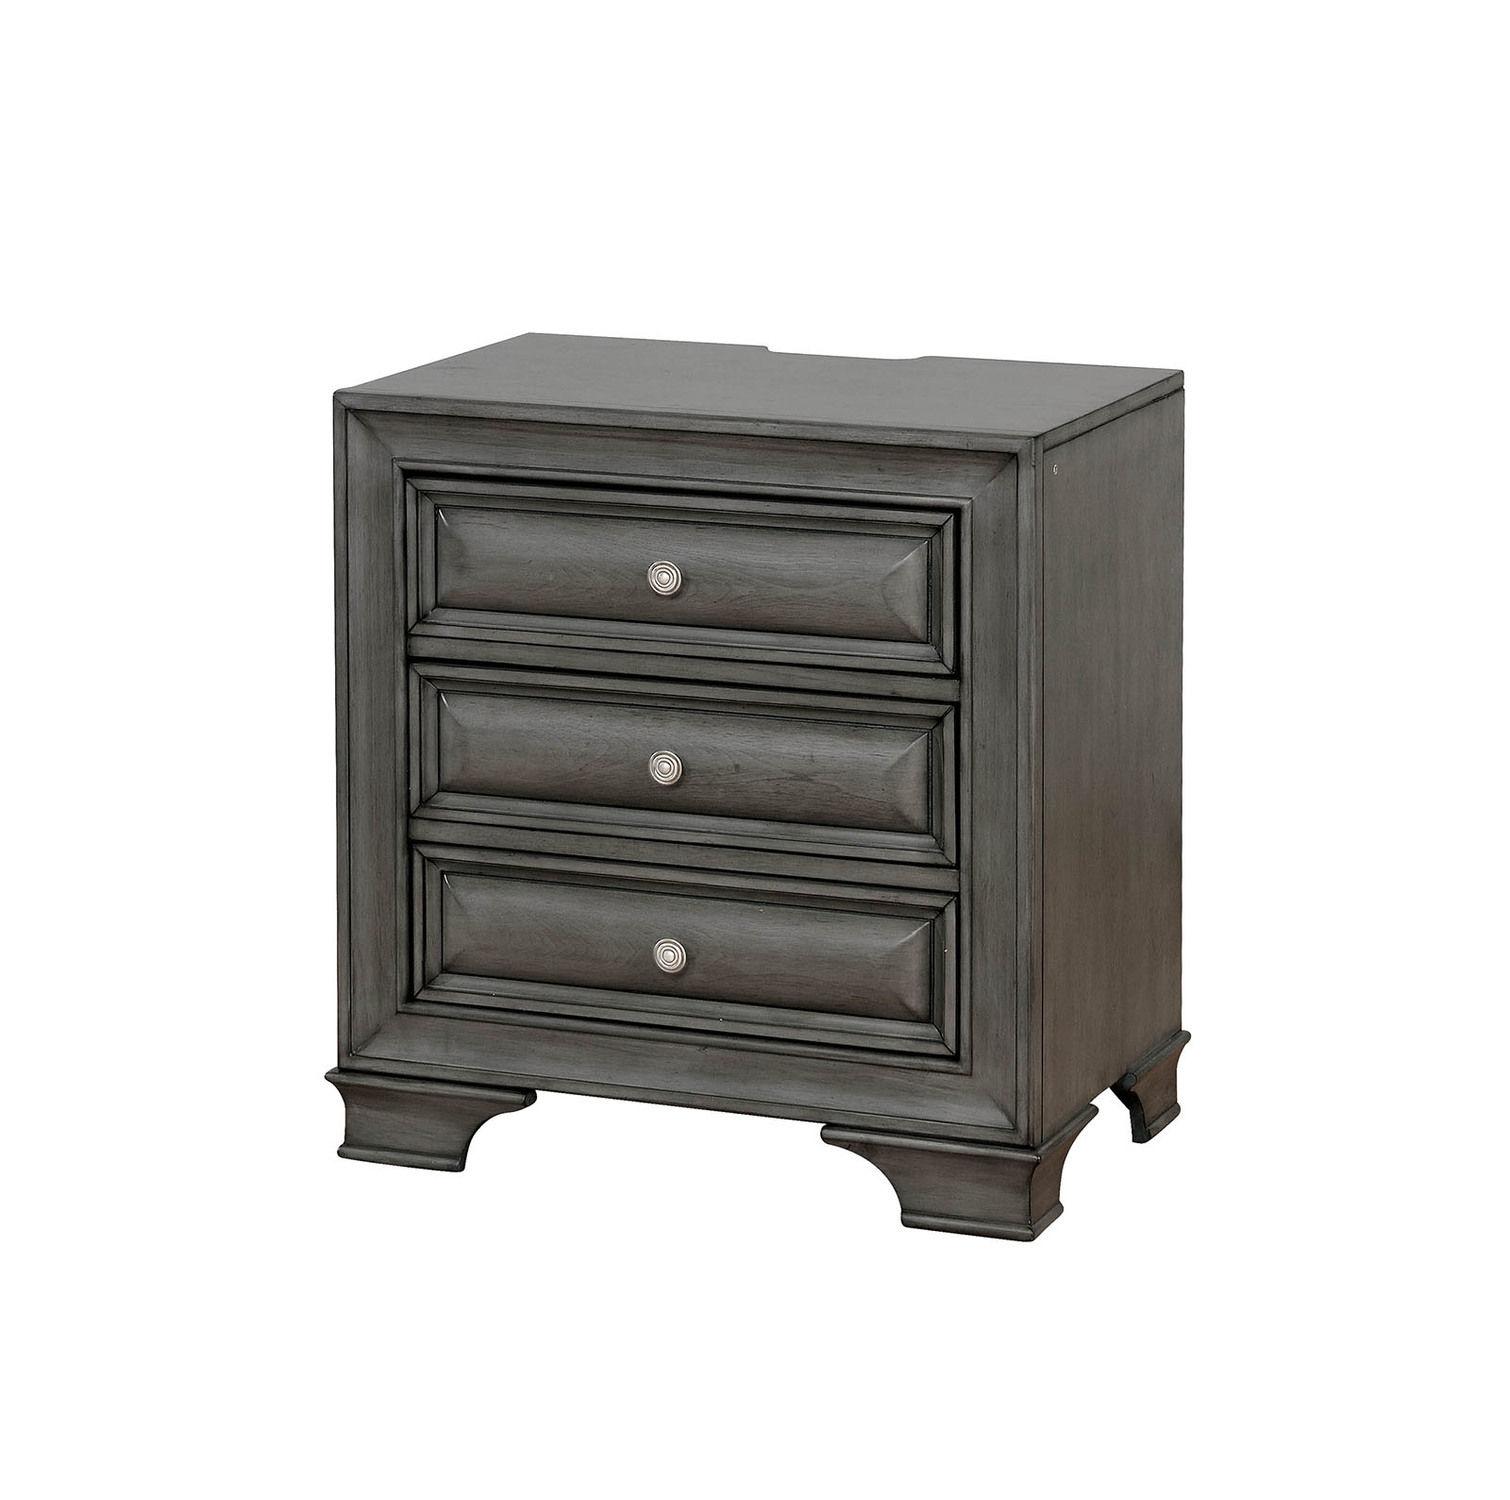 Transitional Nightstand CM7302GY-N Brandt CM7302GY-N in Gray 